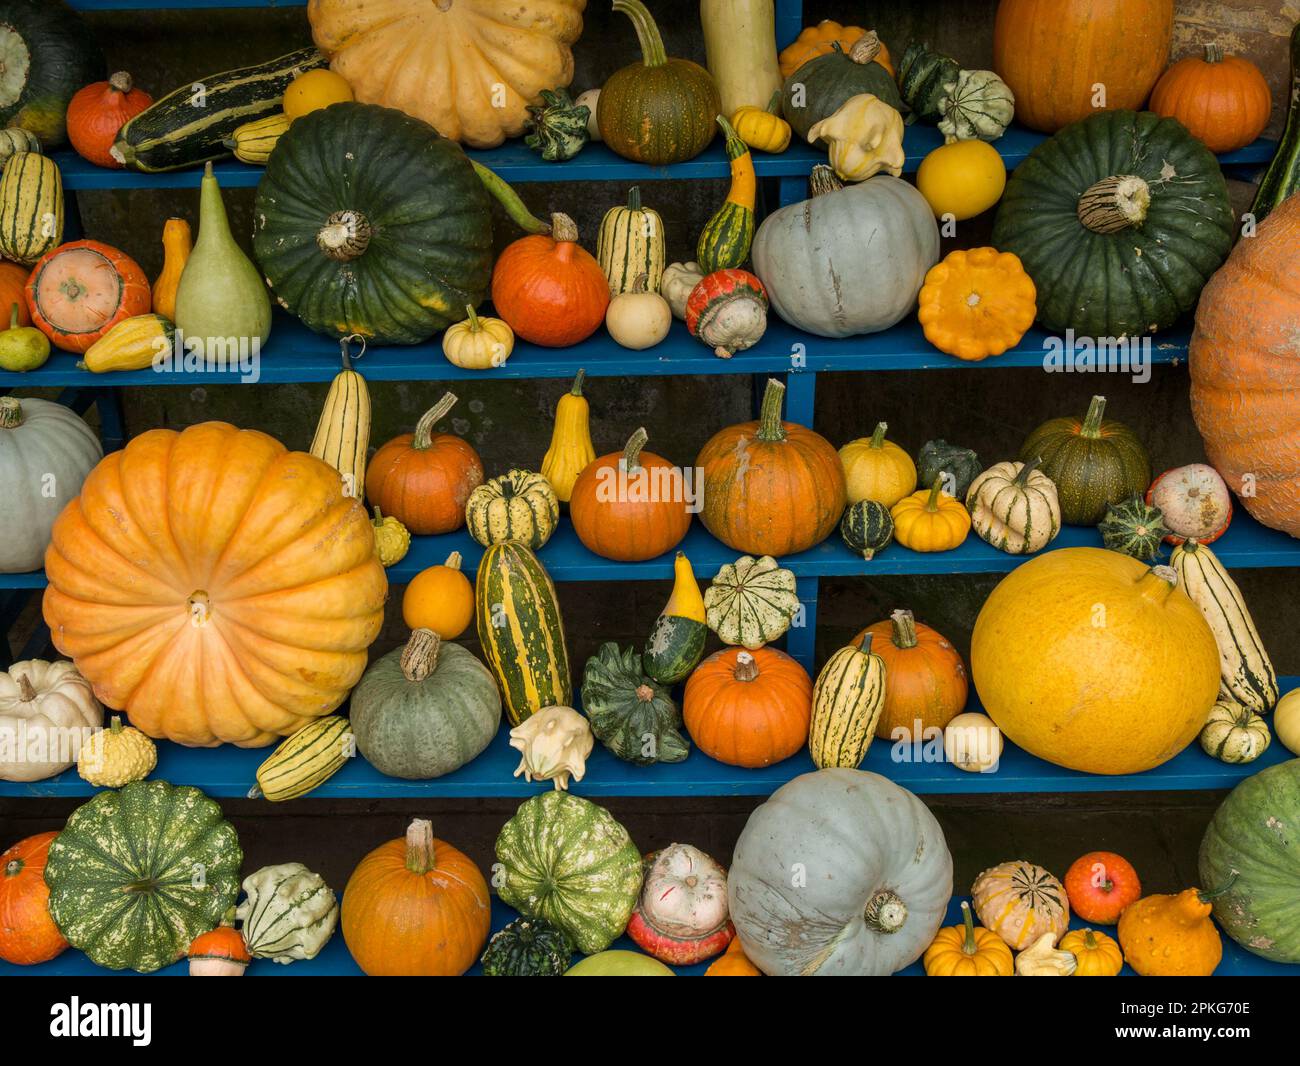 Colourful display of ornamental gourds, pumpkins and squashes on show on shelves in Autumn, Derbyshire, England, UK Stock Photo